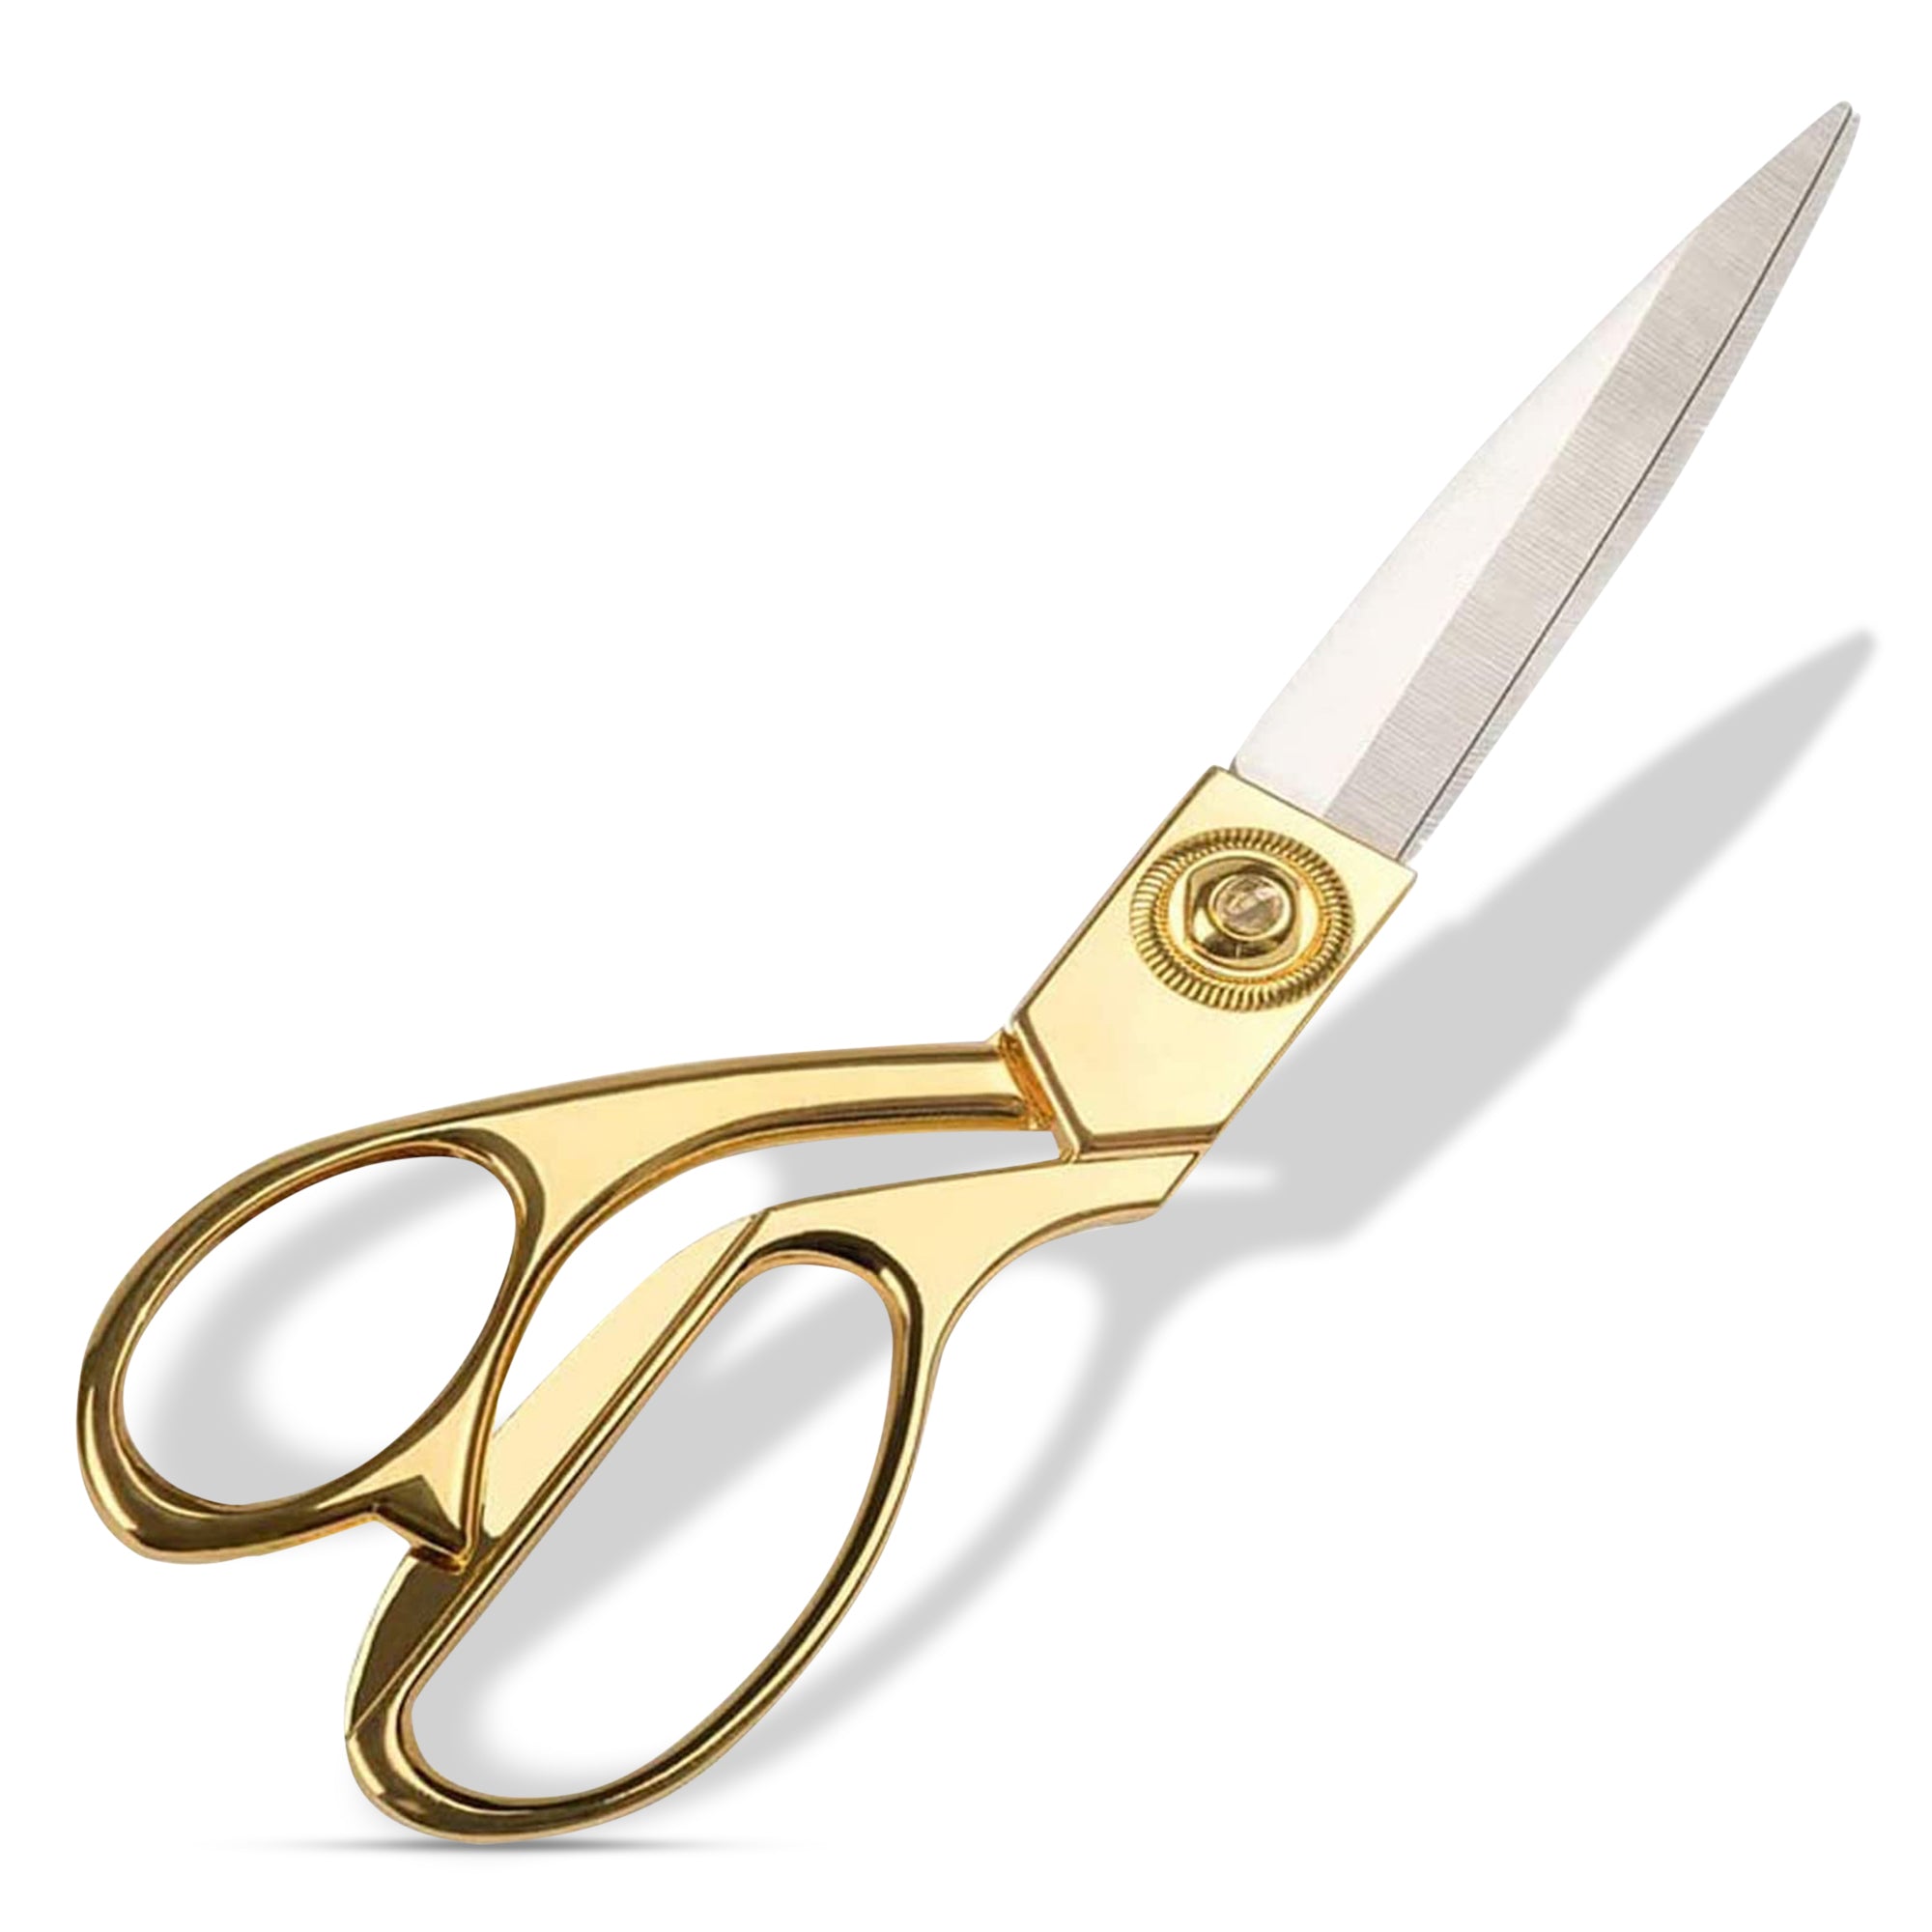 Manogyam Premium Stainless Steel Heavy Duty Tailor Scissors for Fabric, Cloth Cutting Scissor with Brass Finish Handle (Set of 1,Golden)